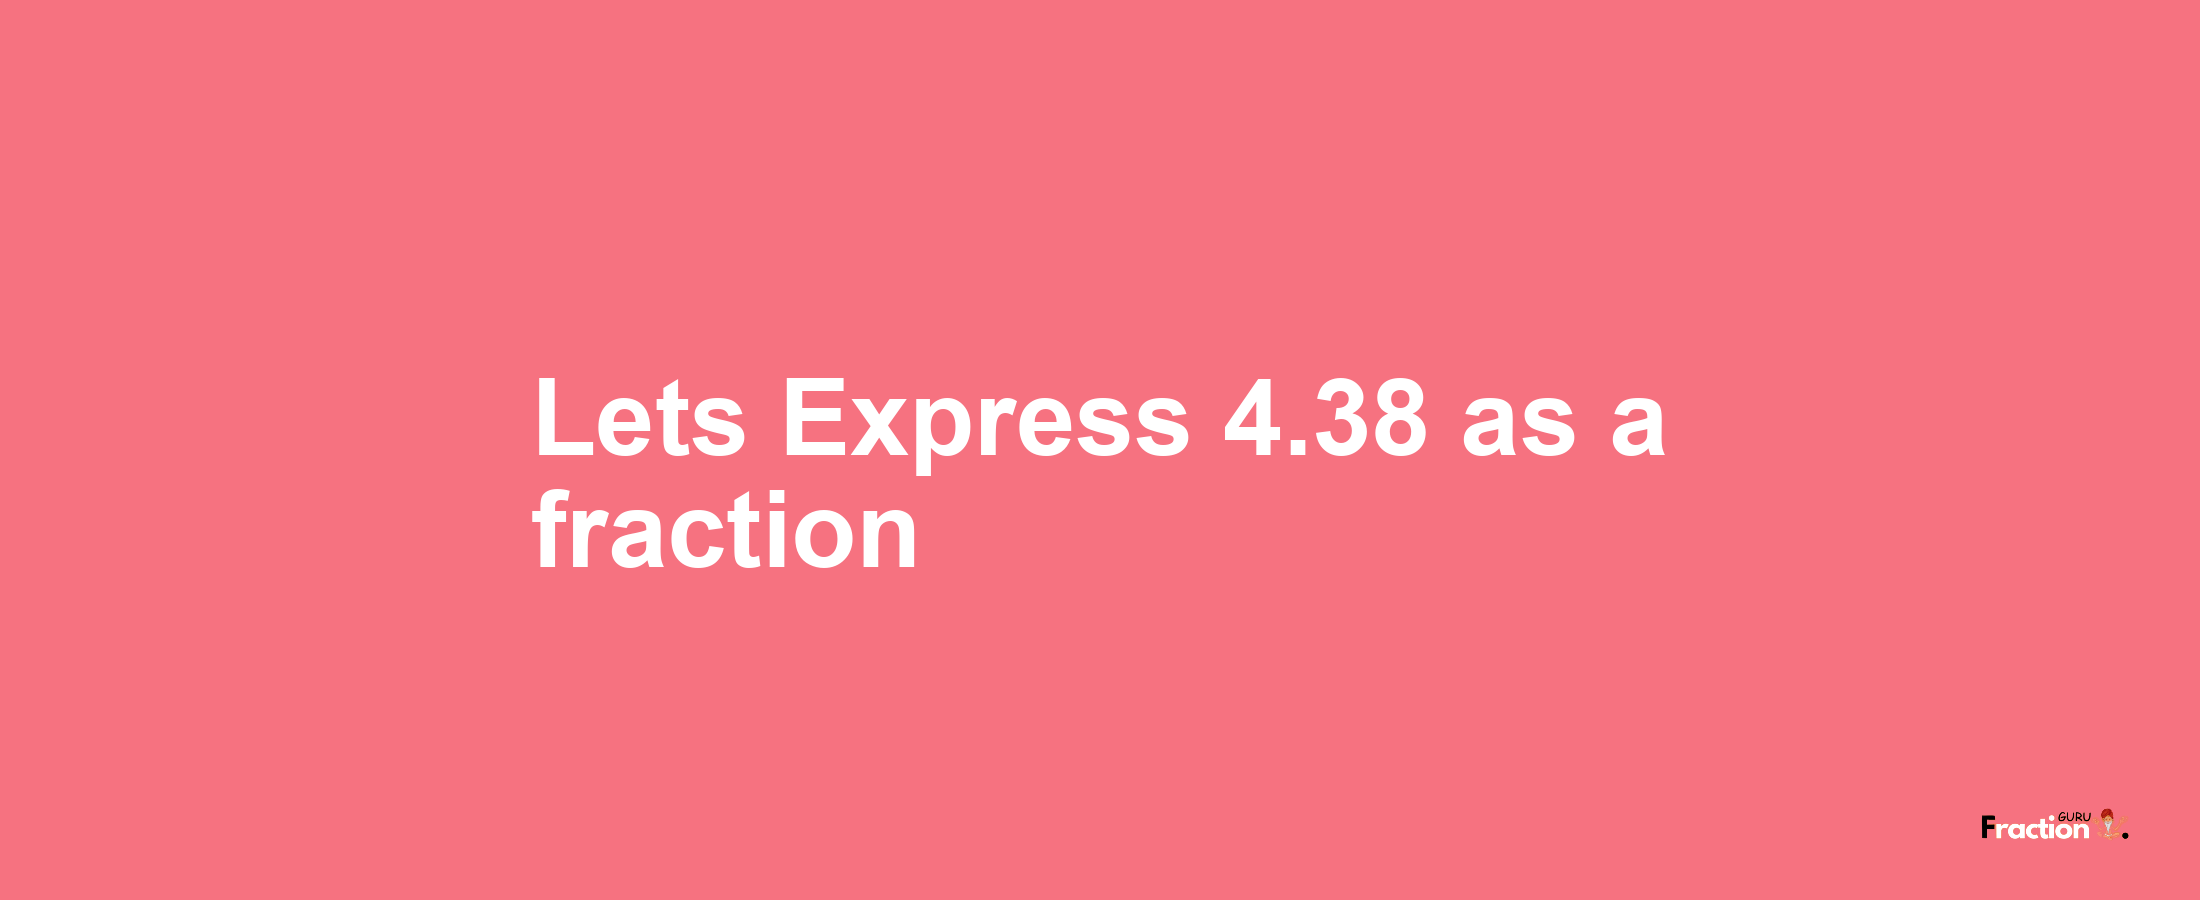 Lets Express 4.38 as afraction